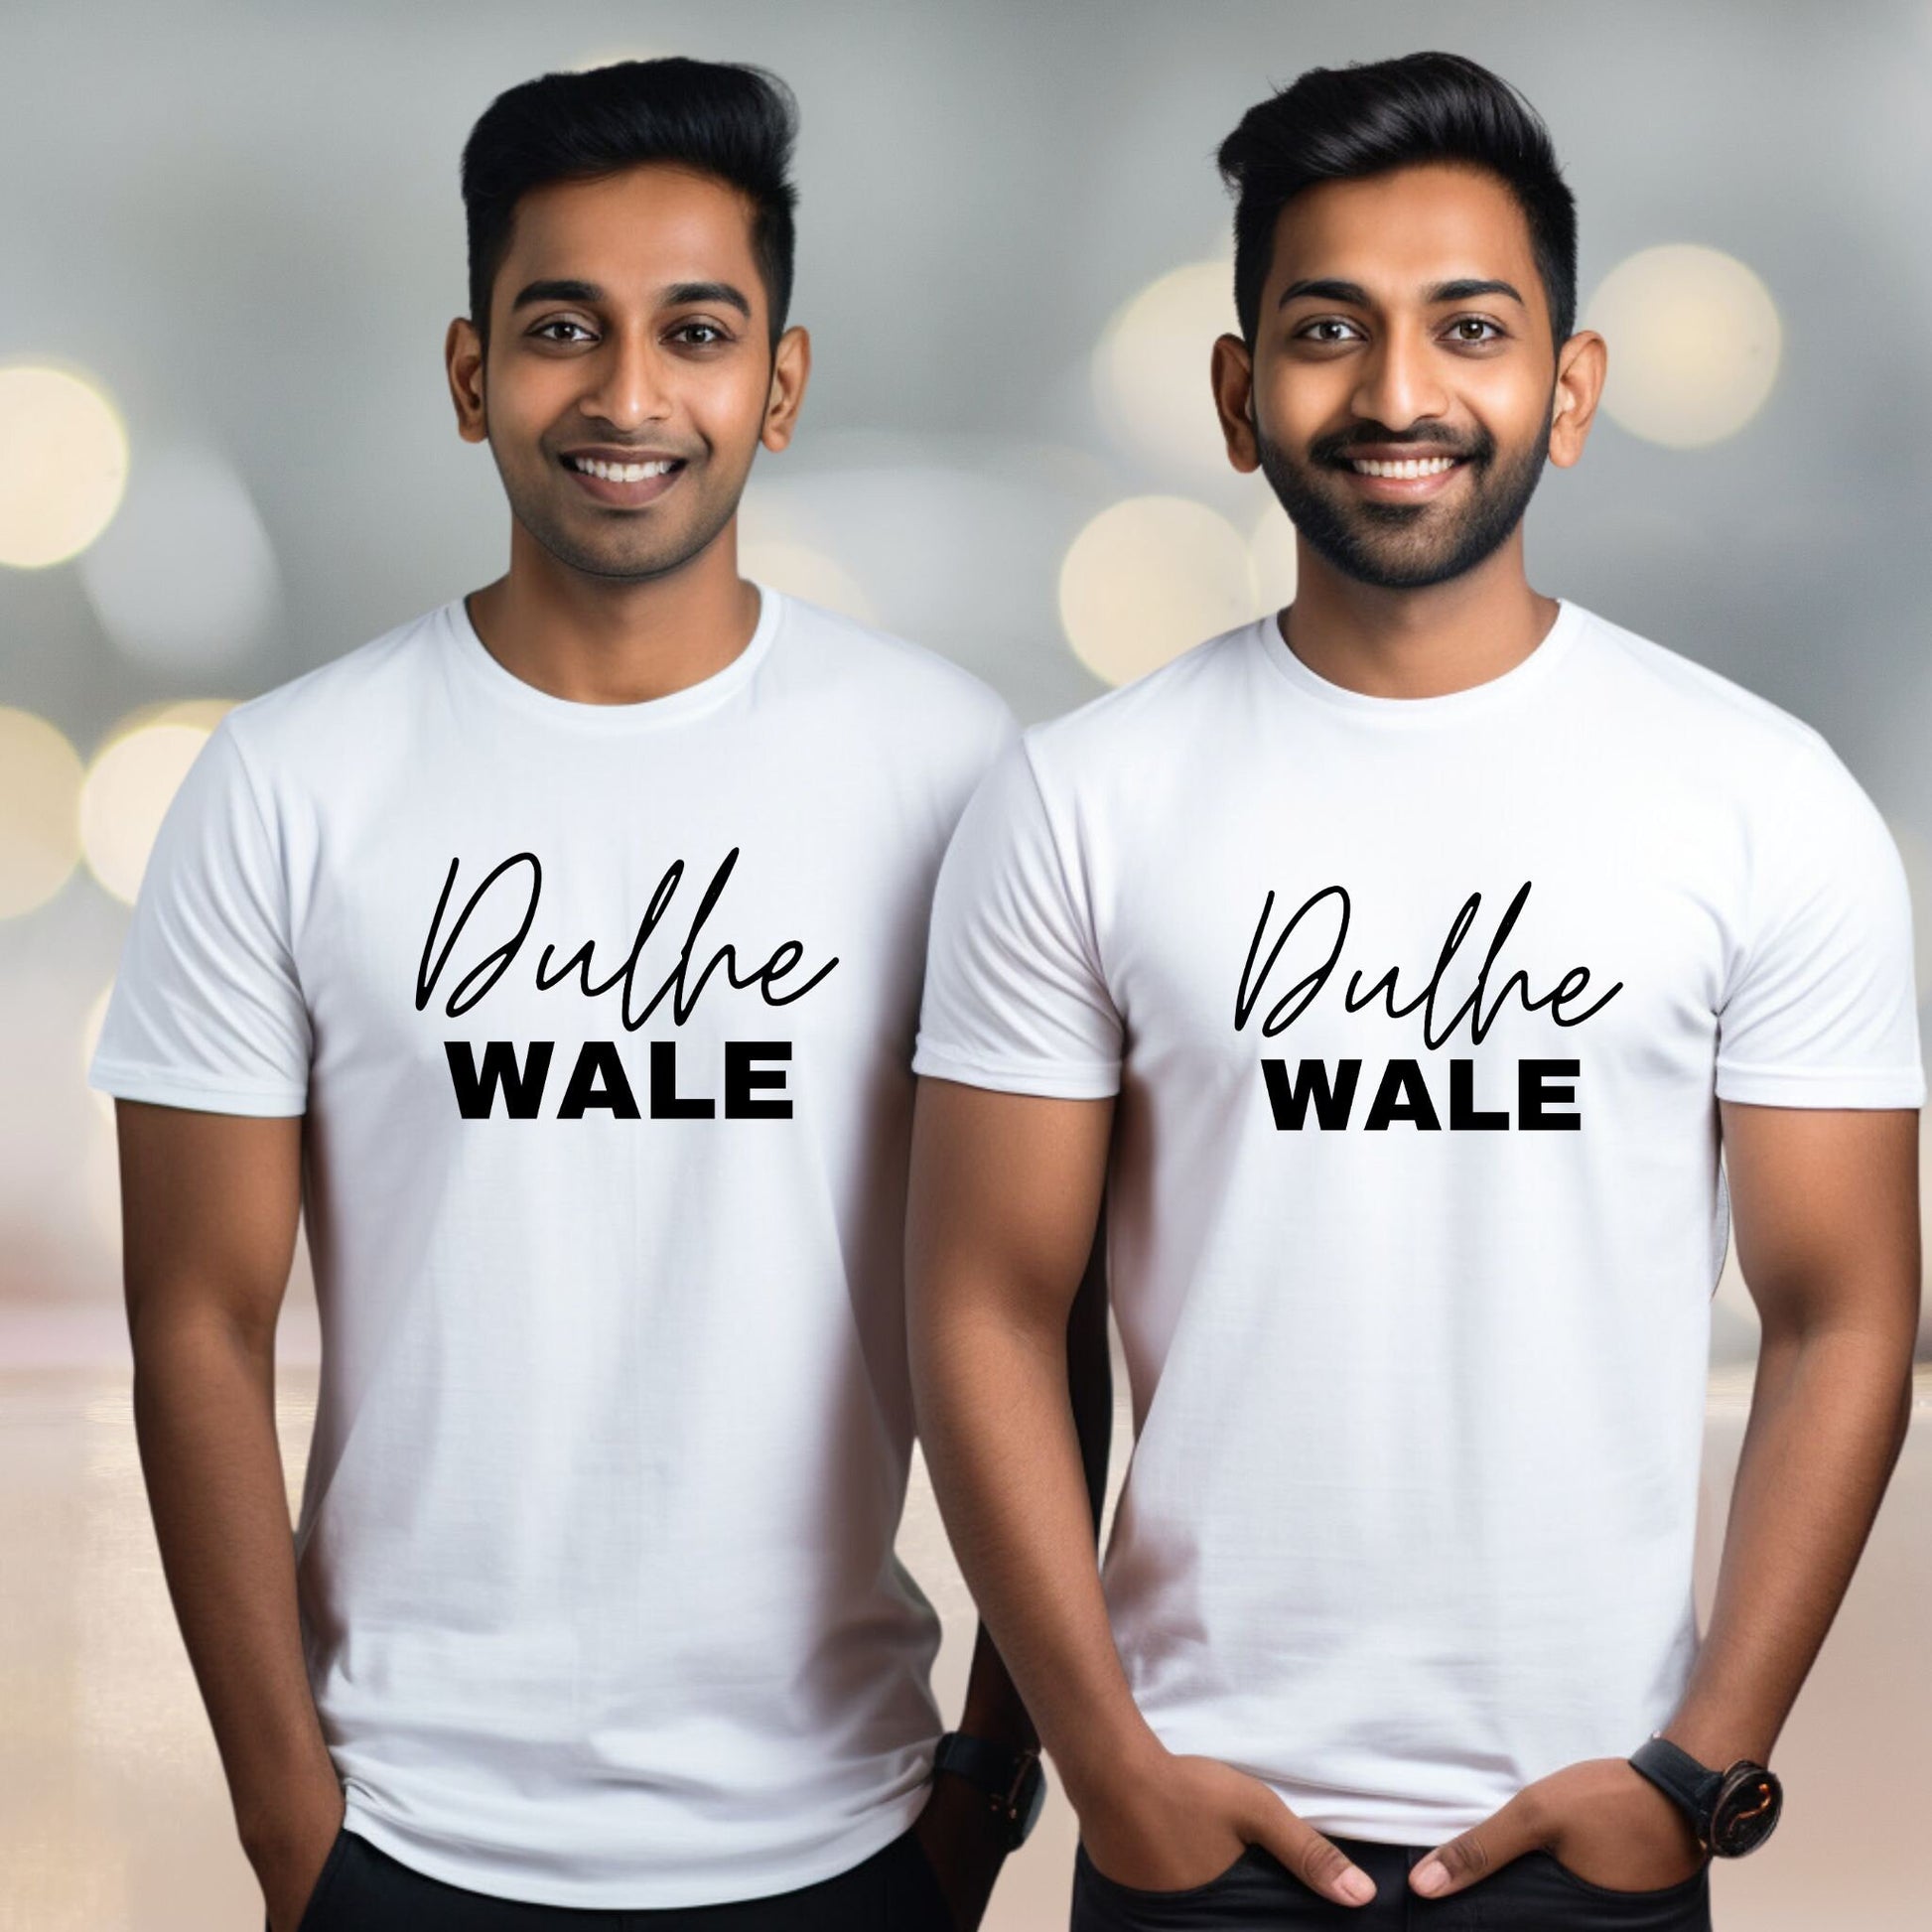 Indian Bridal Shower Shirts, Indian Engagement, Bride and Groom Tribe/Crew Shirts for South Asian Weddings, Dulhan To Be, Wedding Family Tee